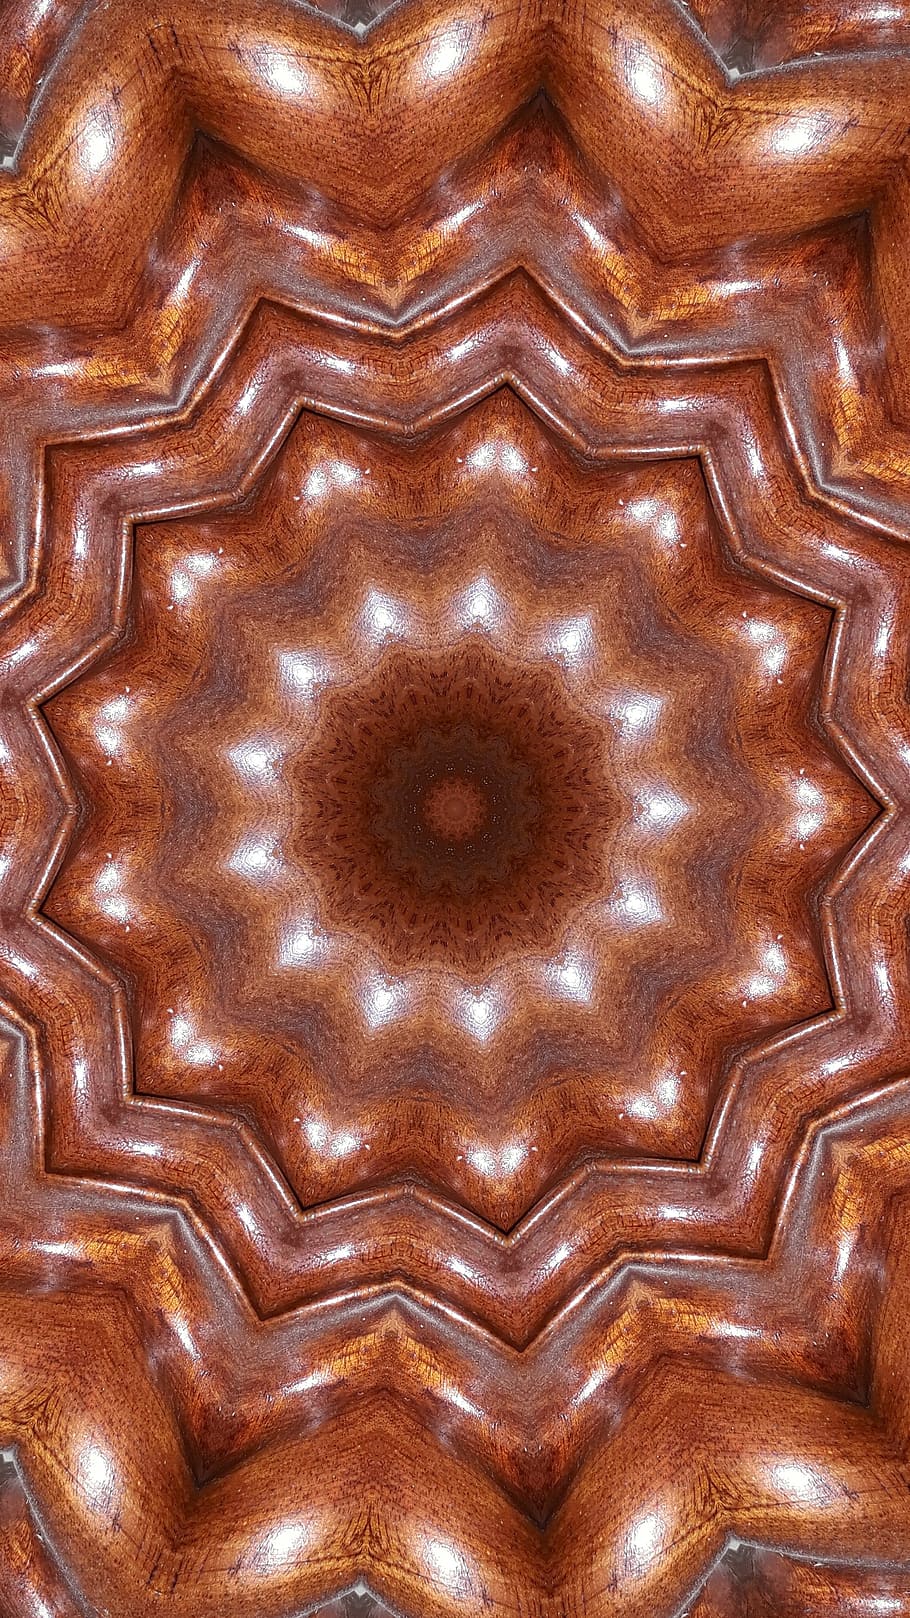 psychedelic, wood, object, pattern, backgrounds, full frame, close-up, brown, textured, shape